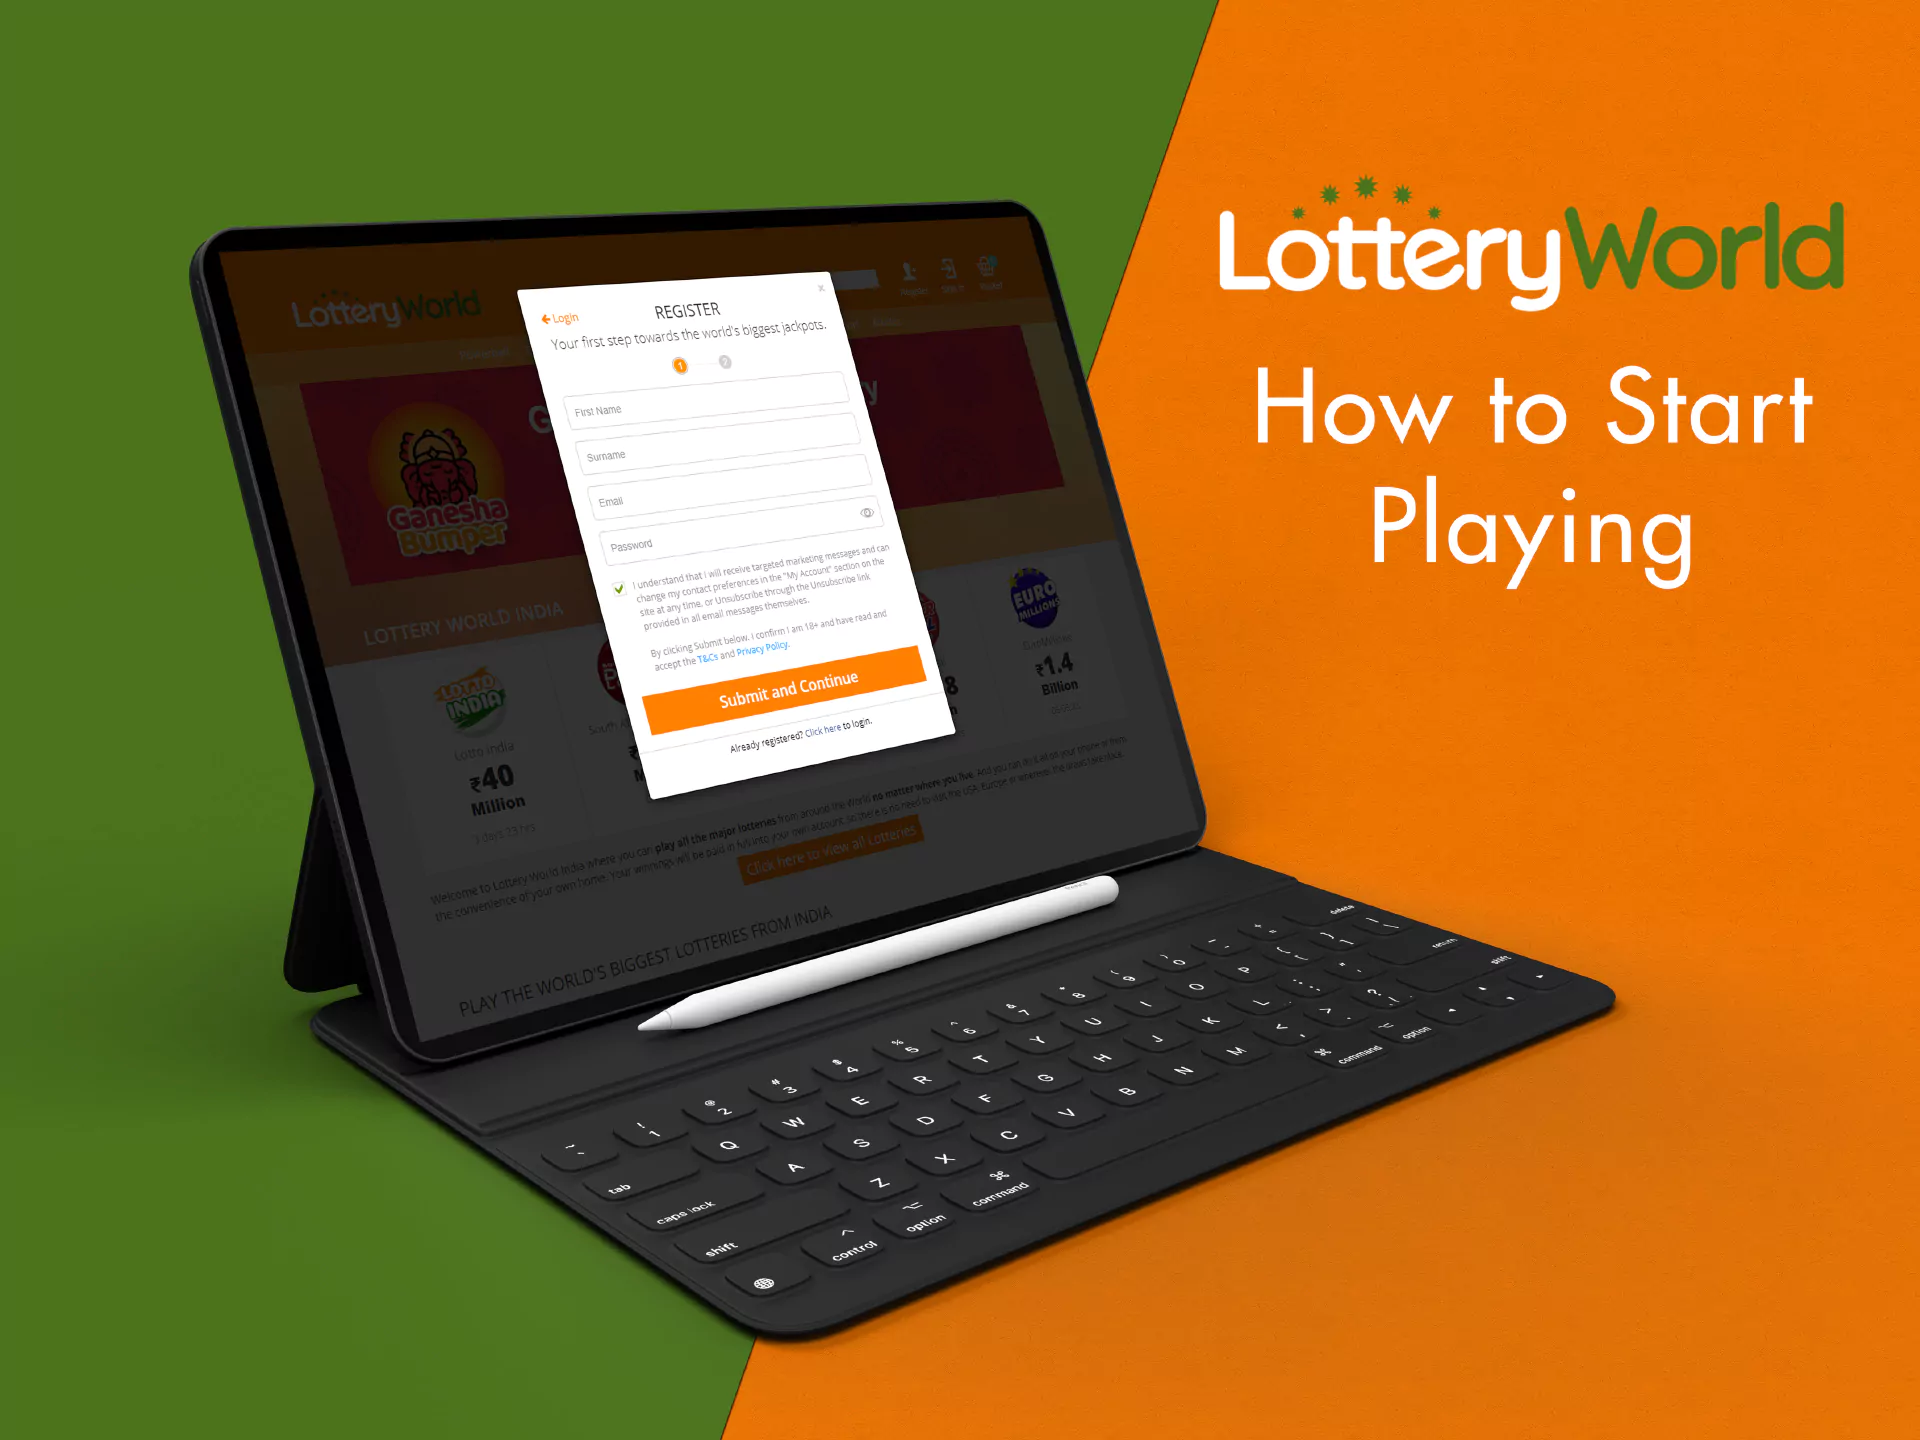 First of all, you need to sign up on the official site of Lottery World.